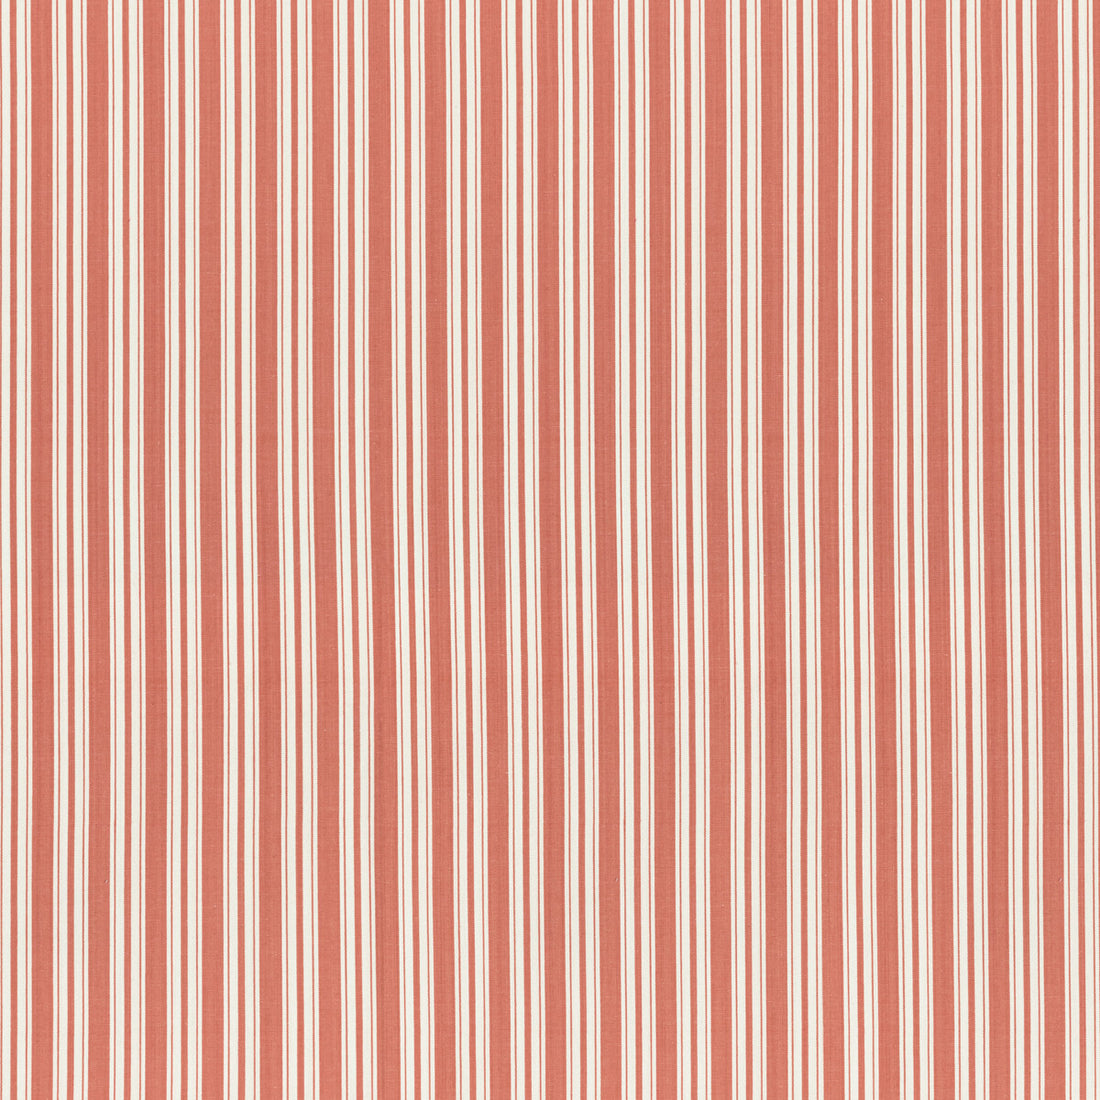 Selune Stripe fabric in melon color - pattern 8022118.12.0 - by Brunschwig &amp; Fils in the Normant Checks And Stripes II collection